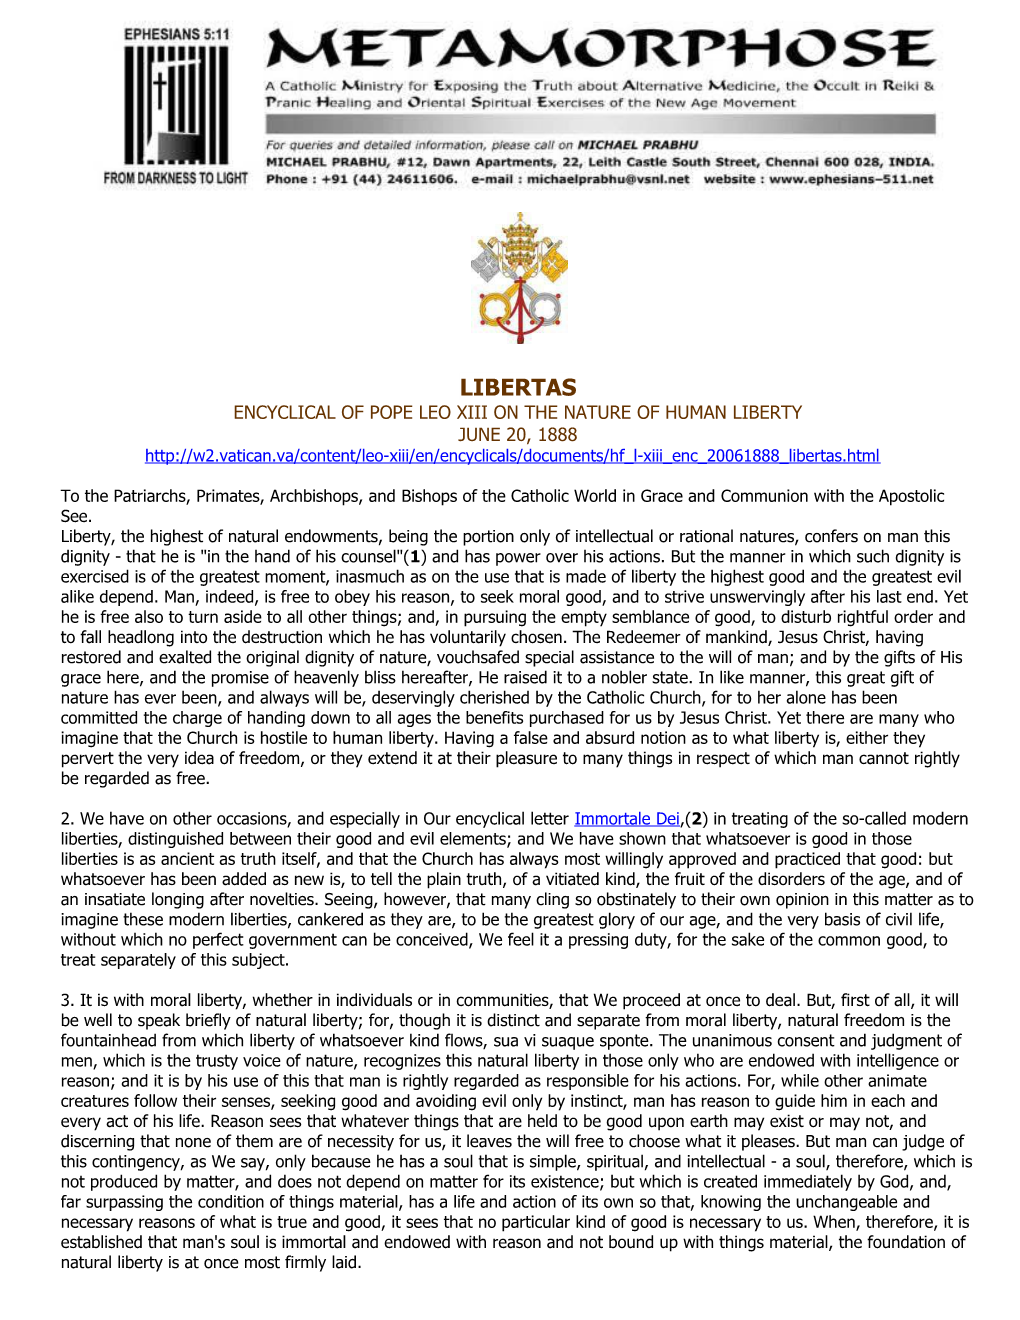 Encyclical of Pope Leo Xiiion the Nature of Human Liberty